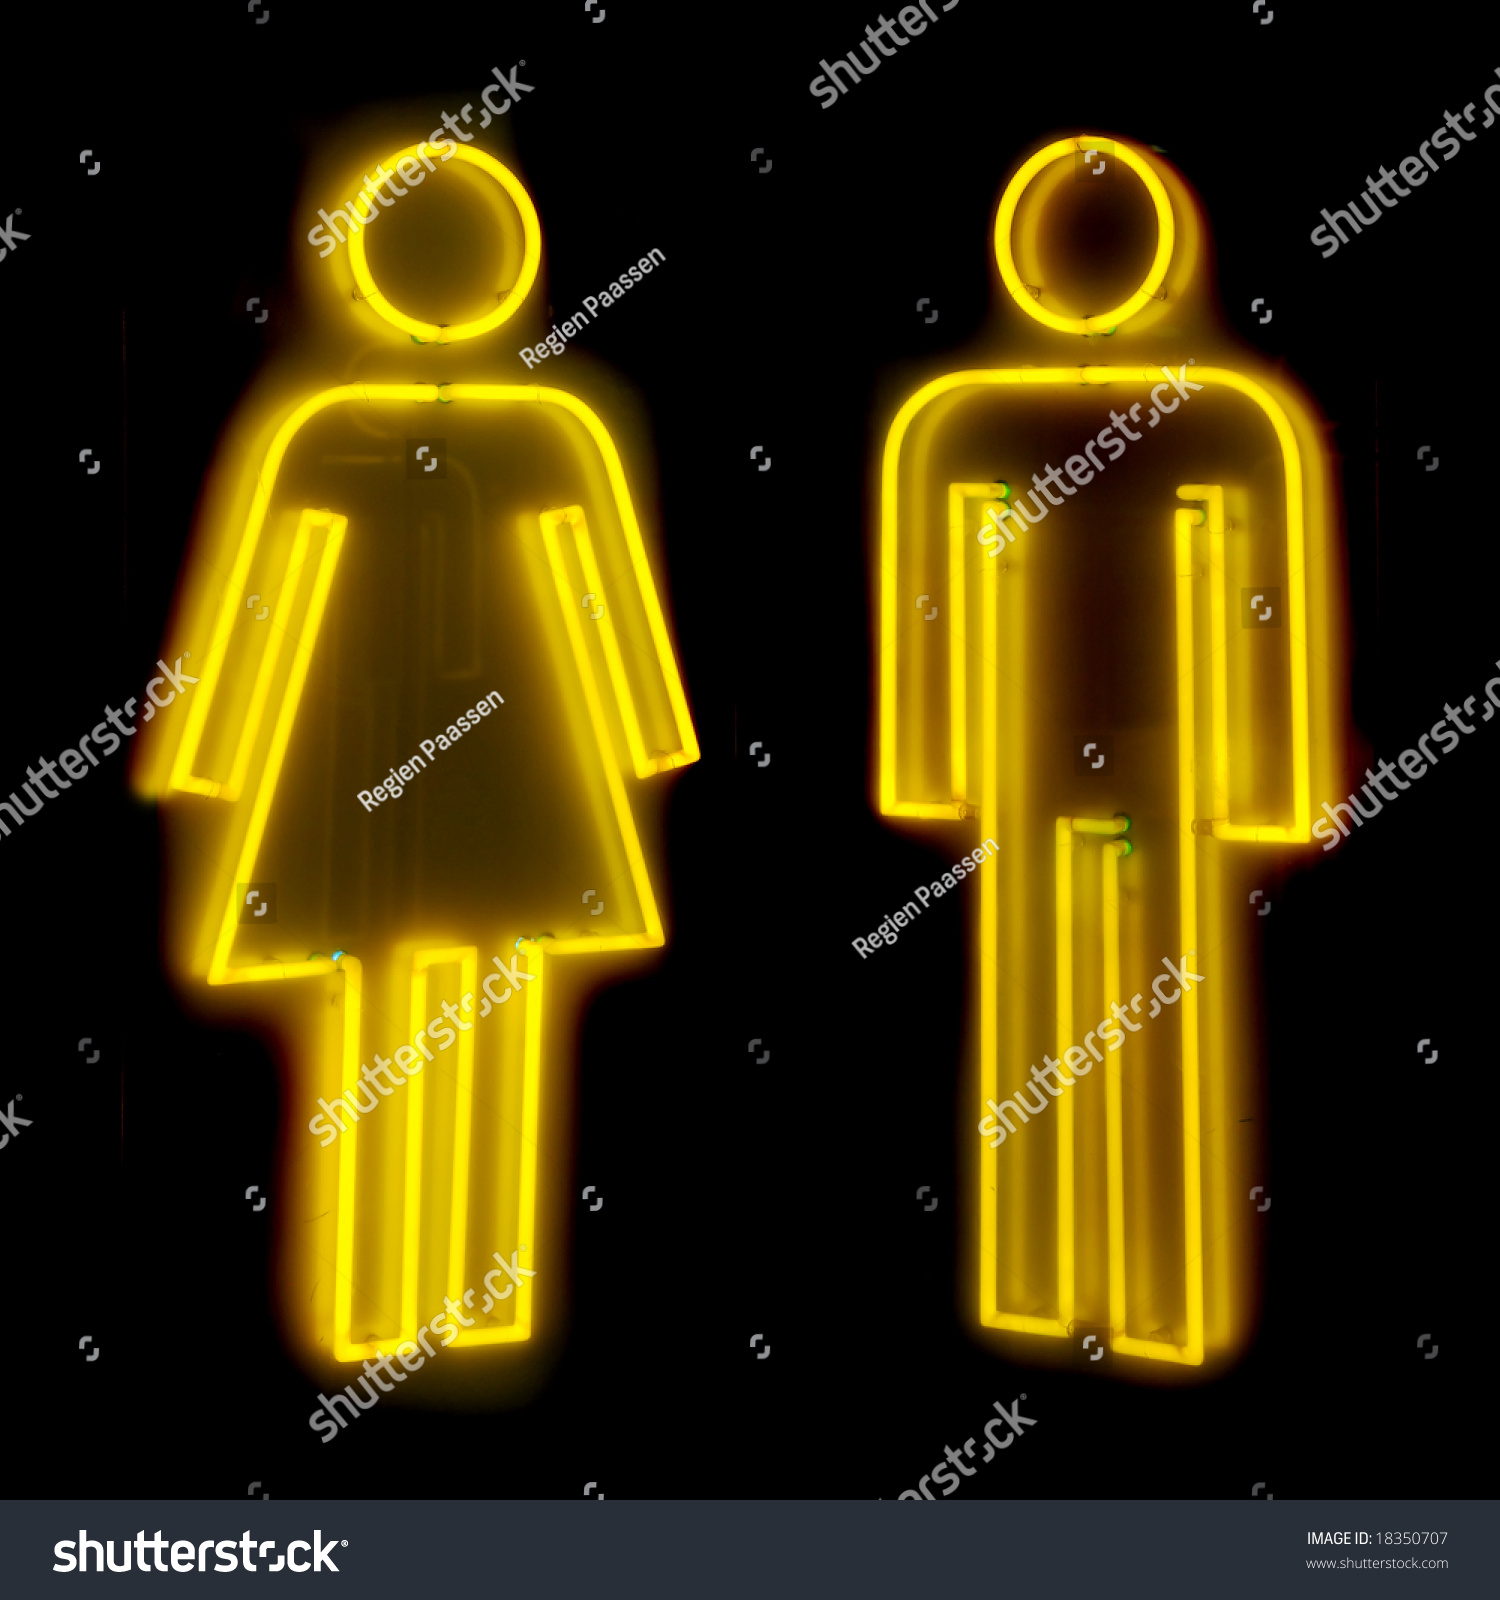 Neon Sign For Male And Female Toilets Stock Photo 18350707 : Shutterstock